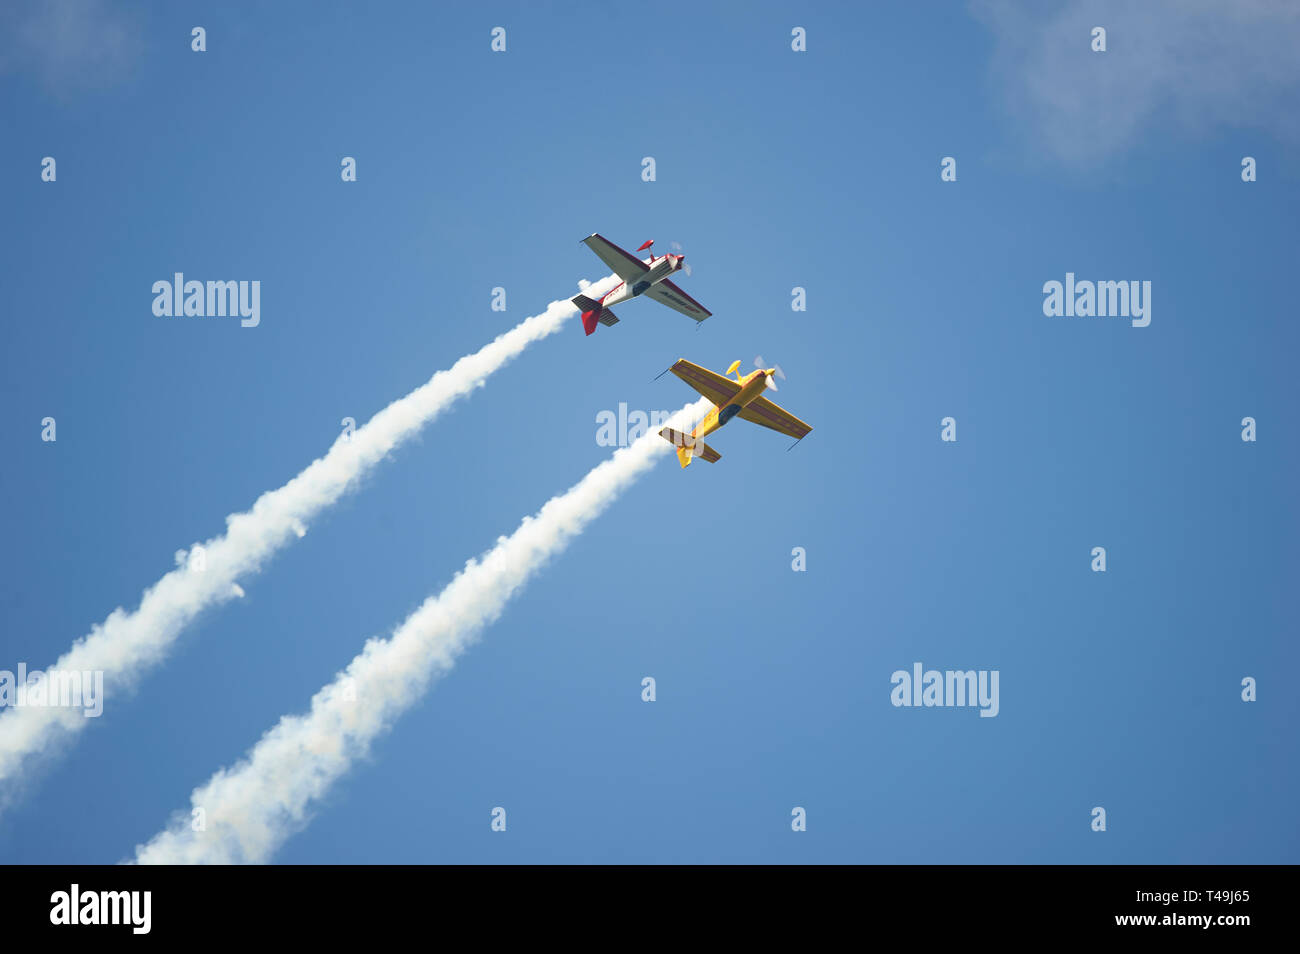 CAP 231 Stunt Aircraft during a display with smoke trails against a blue summer sky Stock Photo